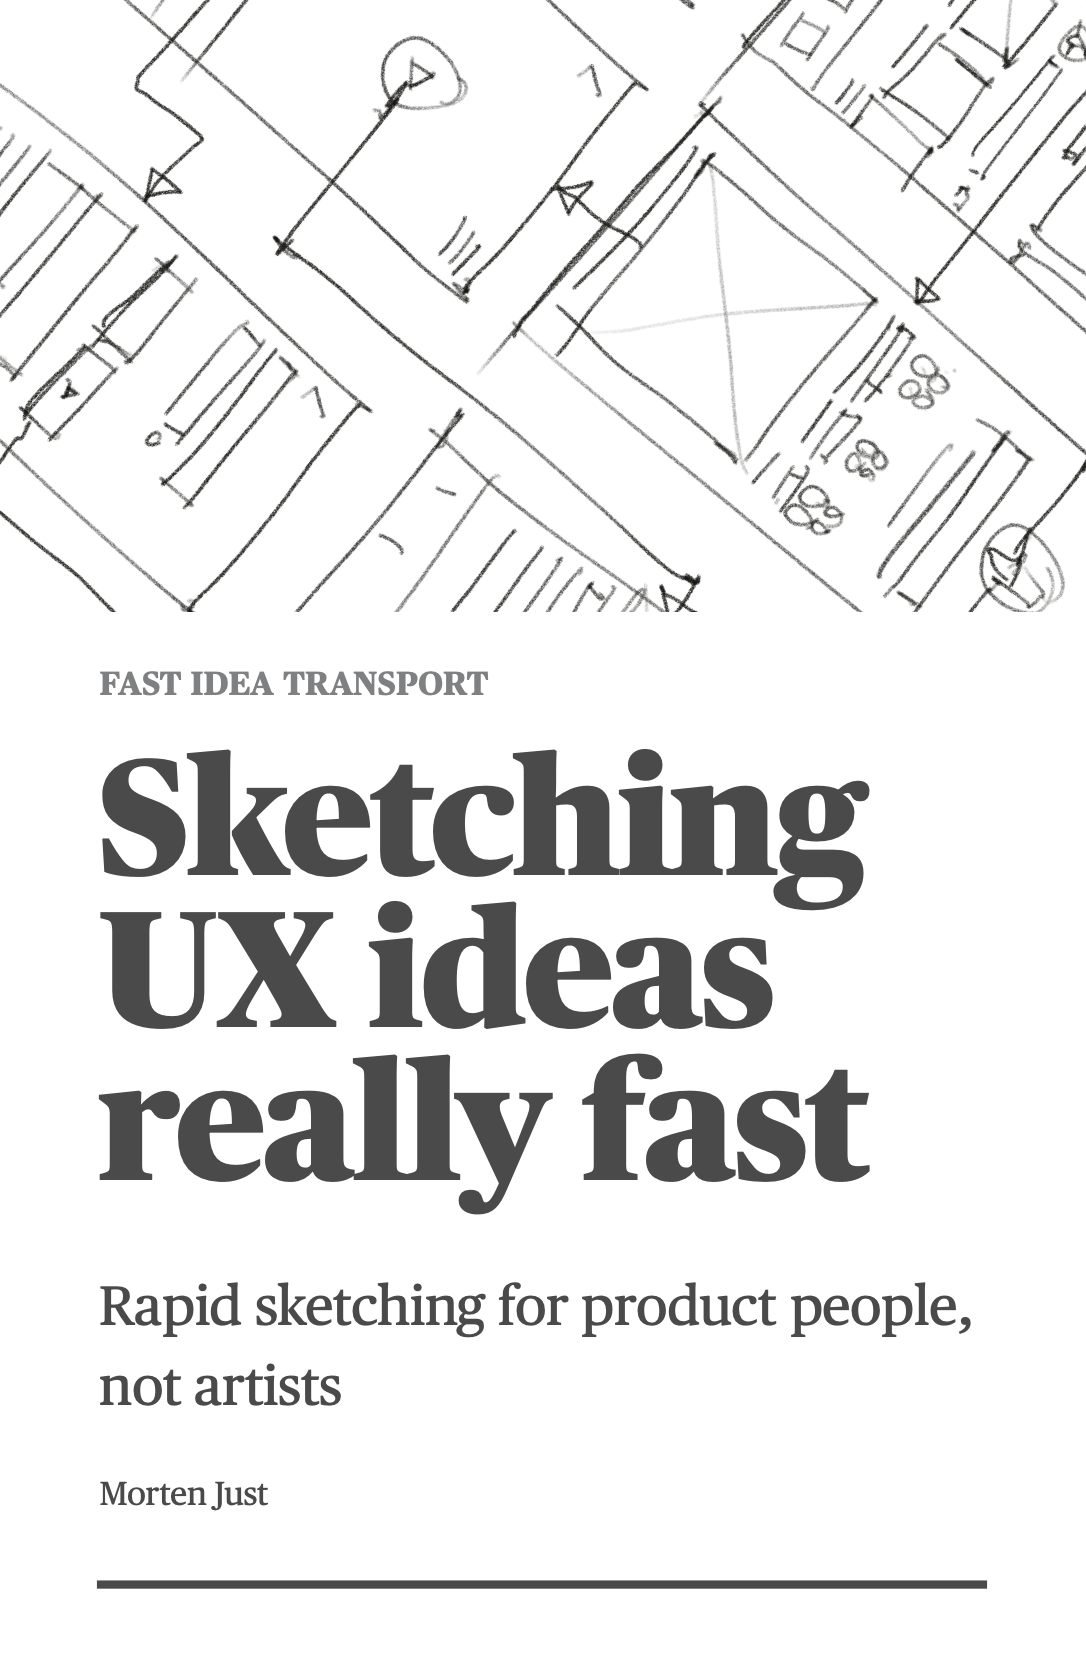 Cover Image for A book about sketching for app design